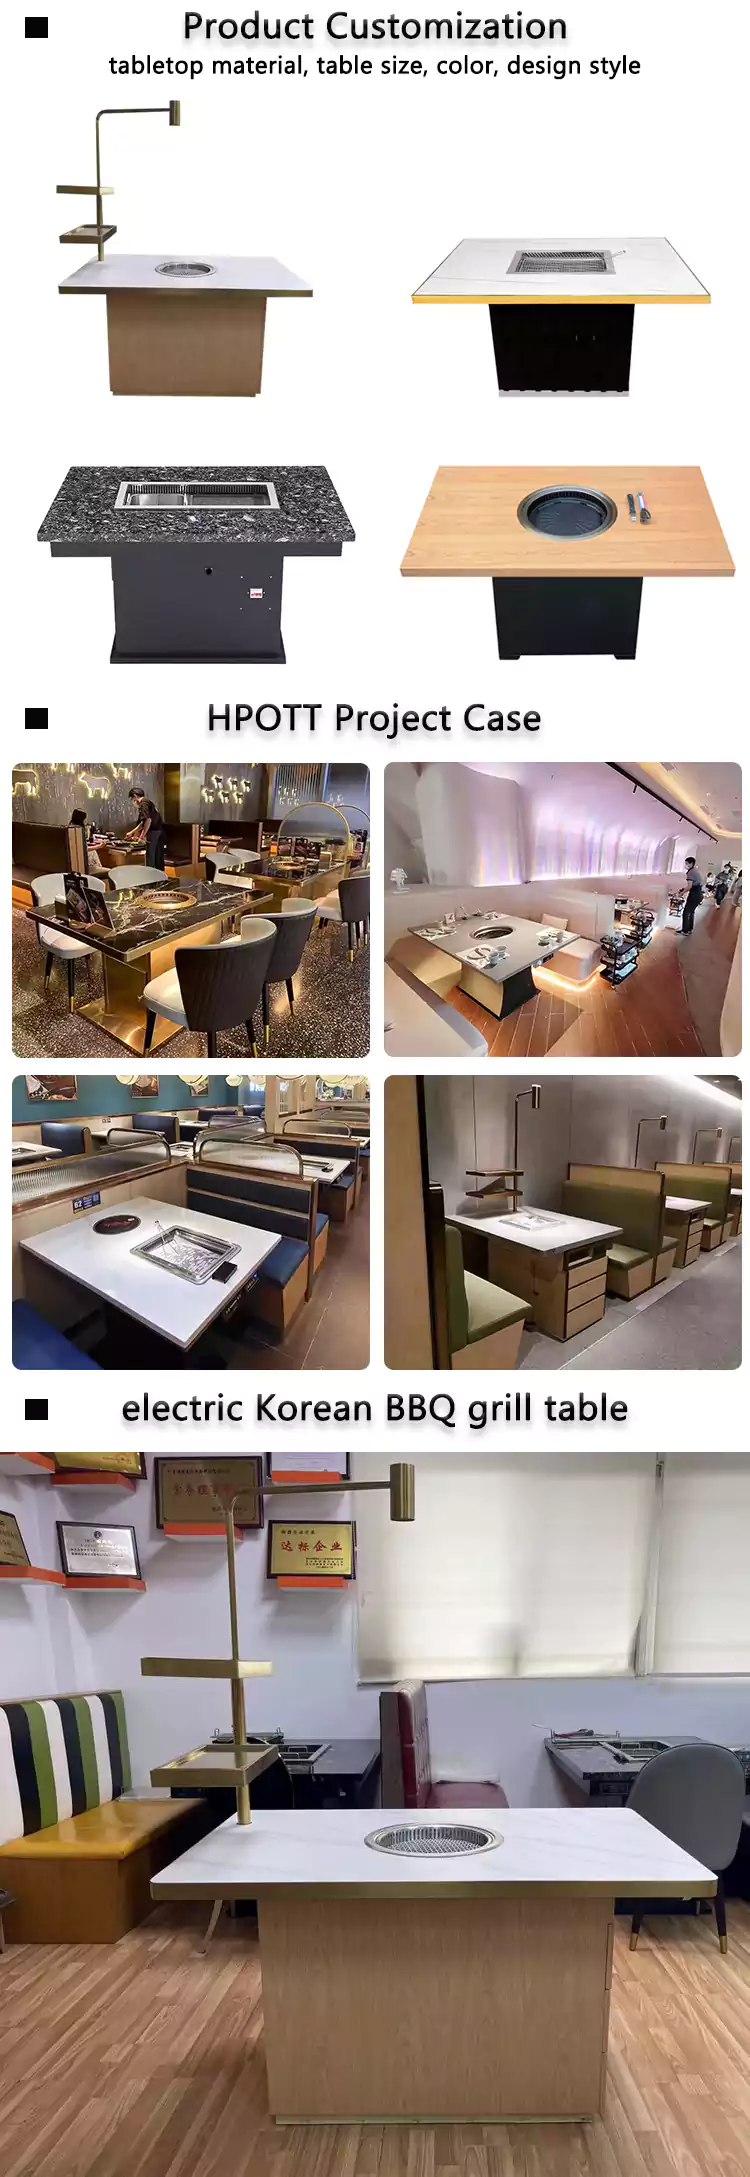 commercial built in electric smokeless korean bbq grill table for restaurant